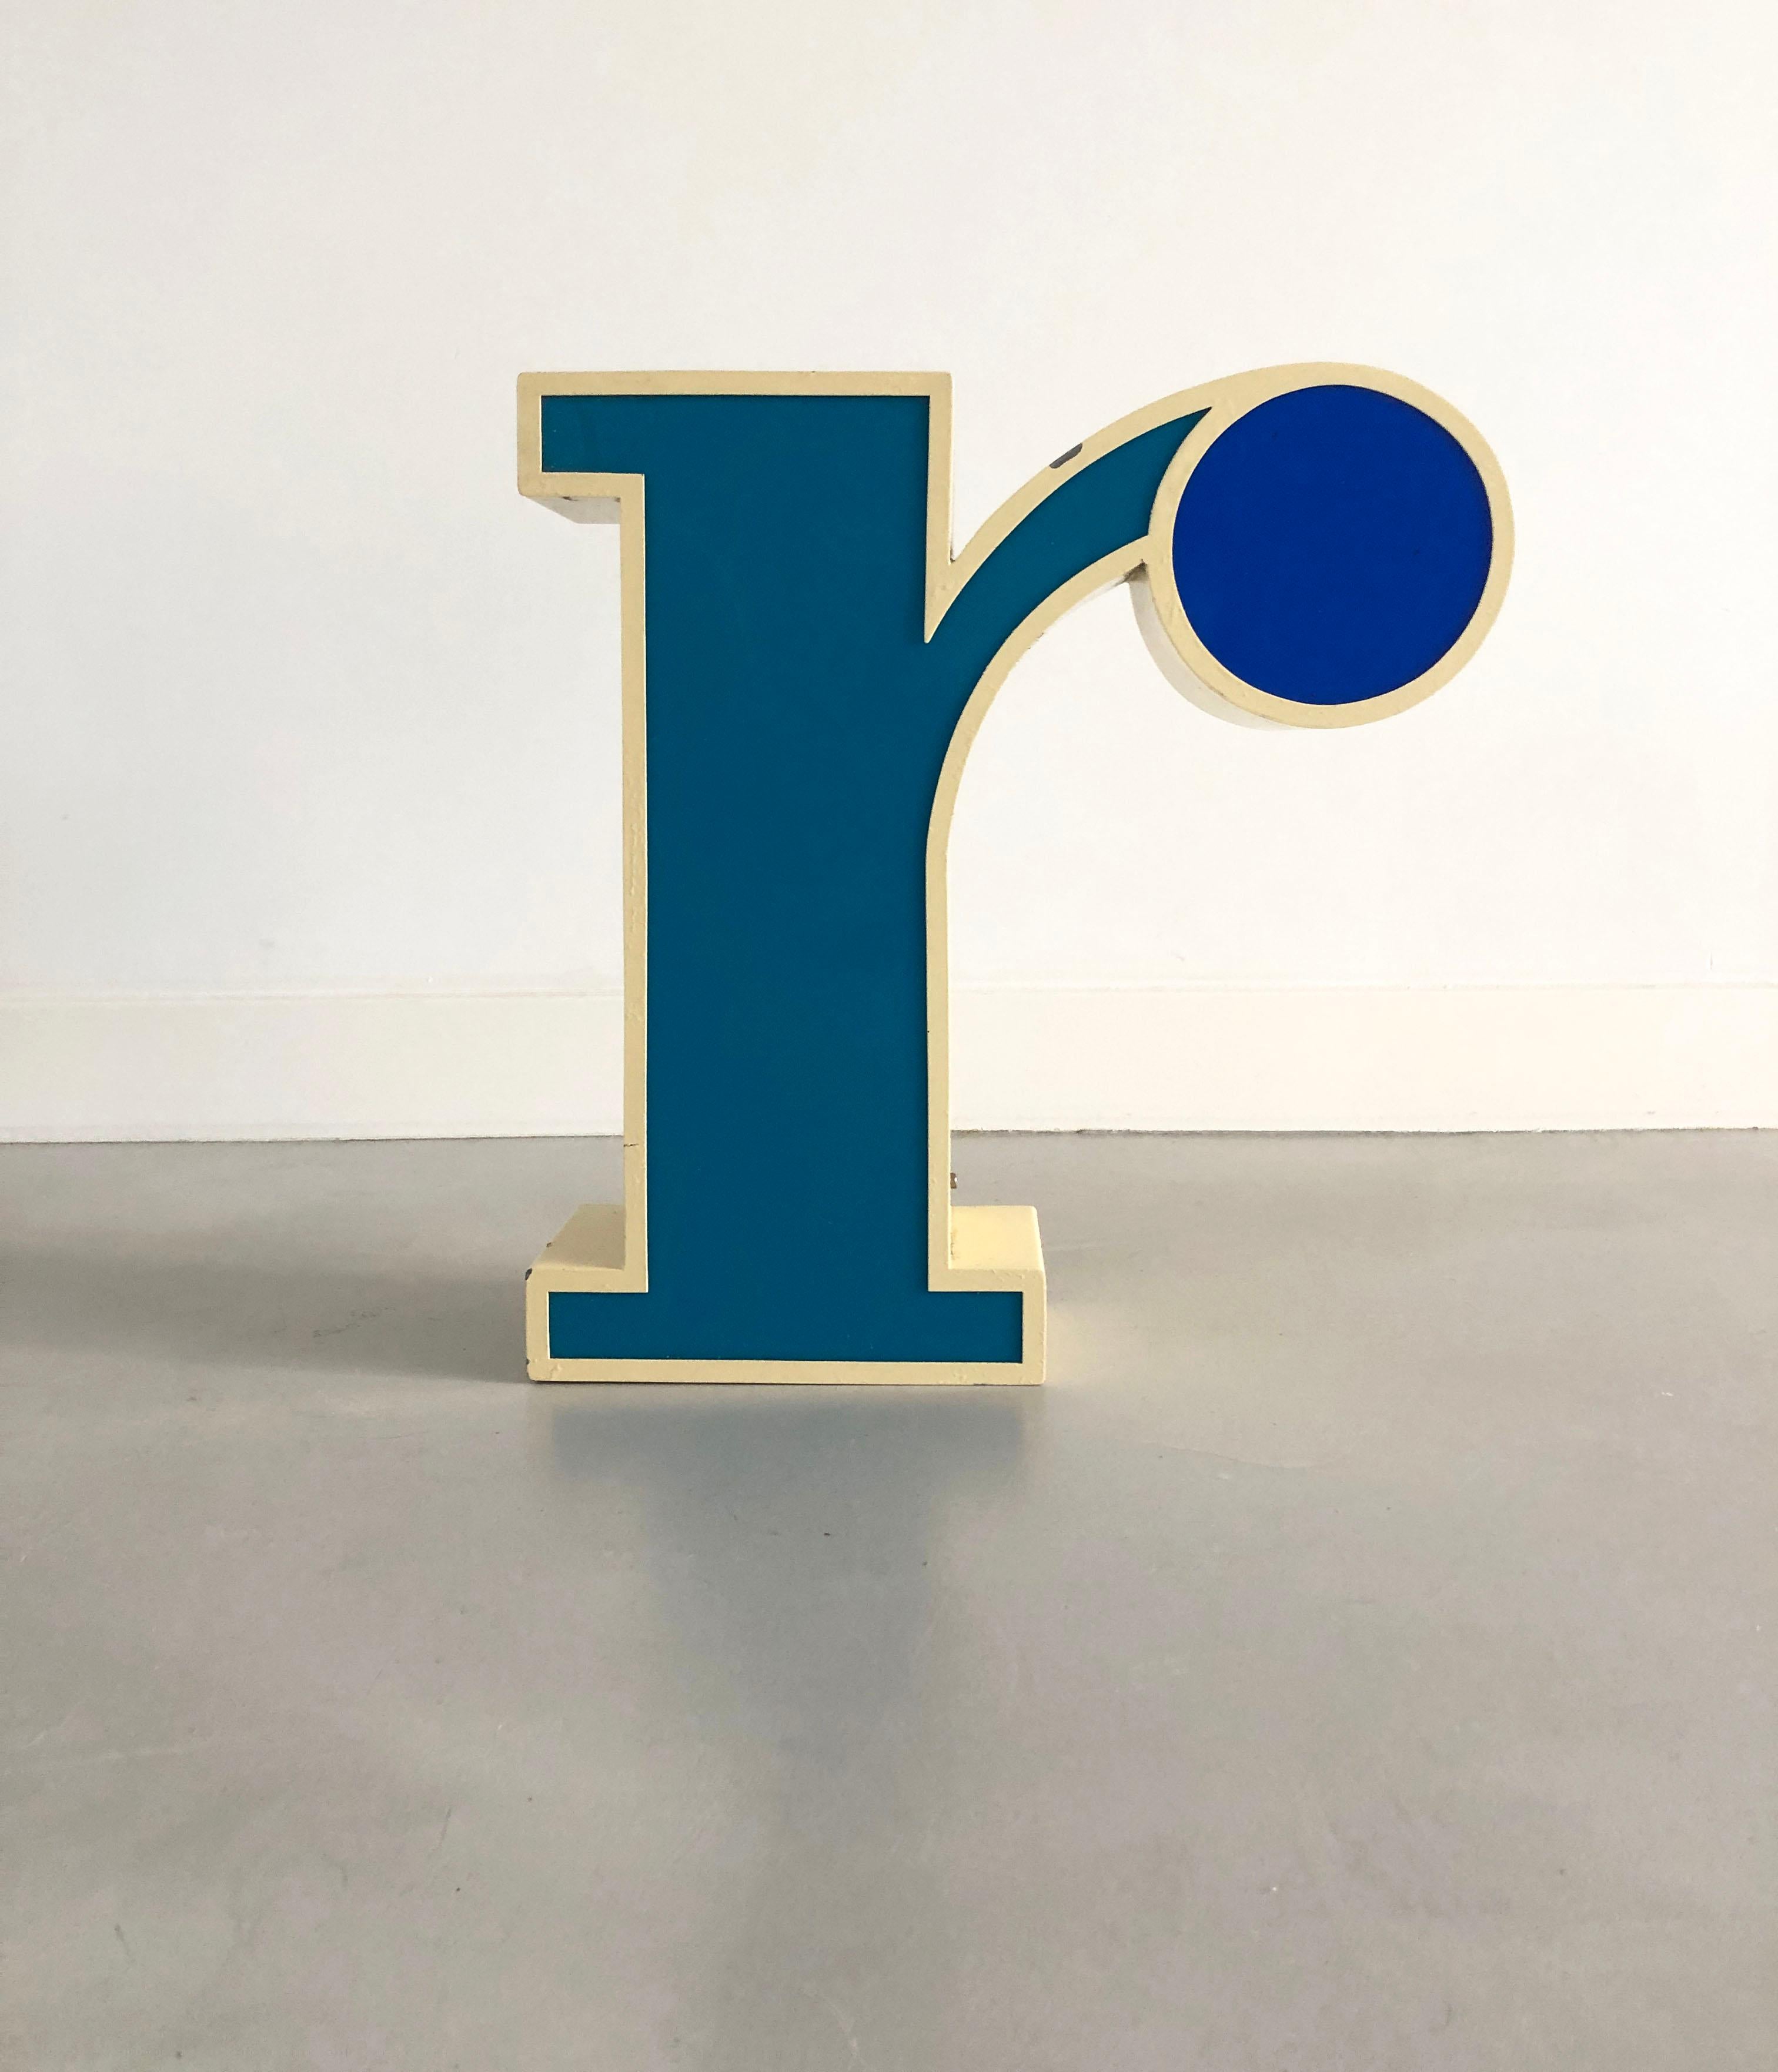 Highly decorative hand-cut vintage advertisement metal channel letter 'R'. 
1970's Art Deco-style metal box letter filled with nice two-tone blue Perspex acrylic. 
No neon inside - you can fill it easily with an LED fixture.